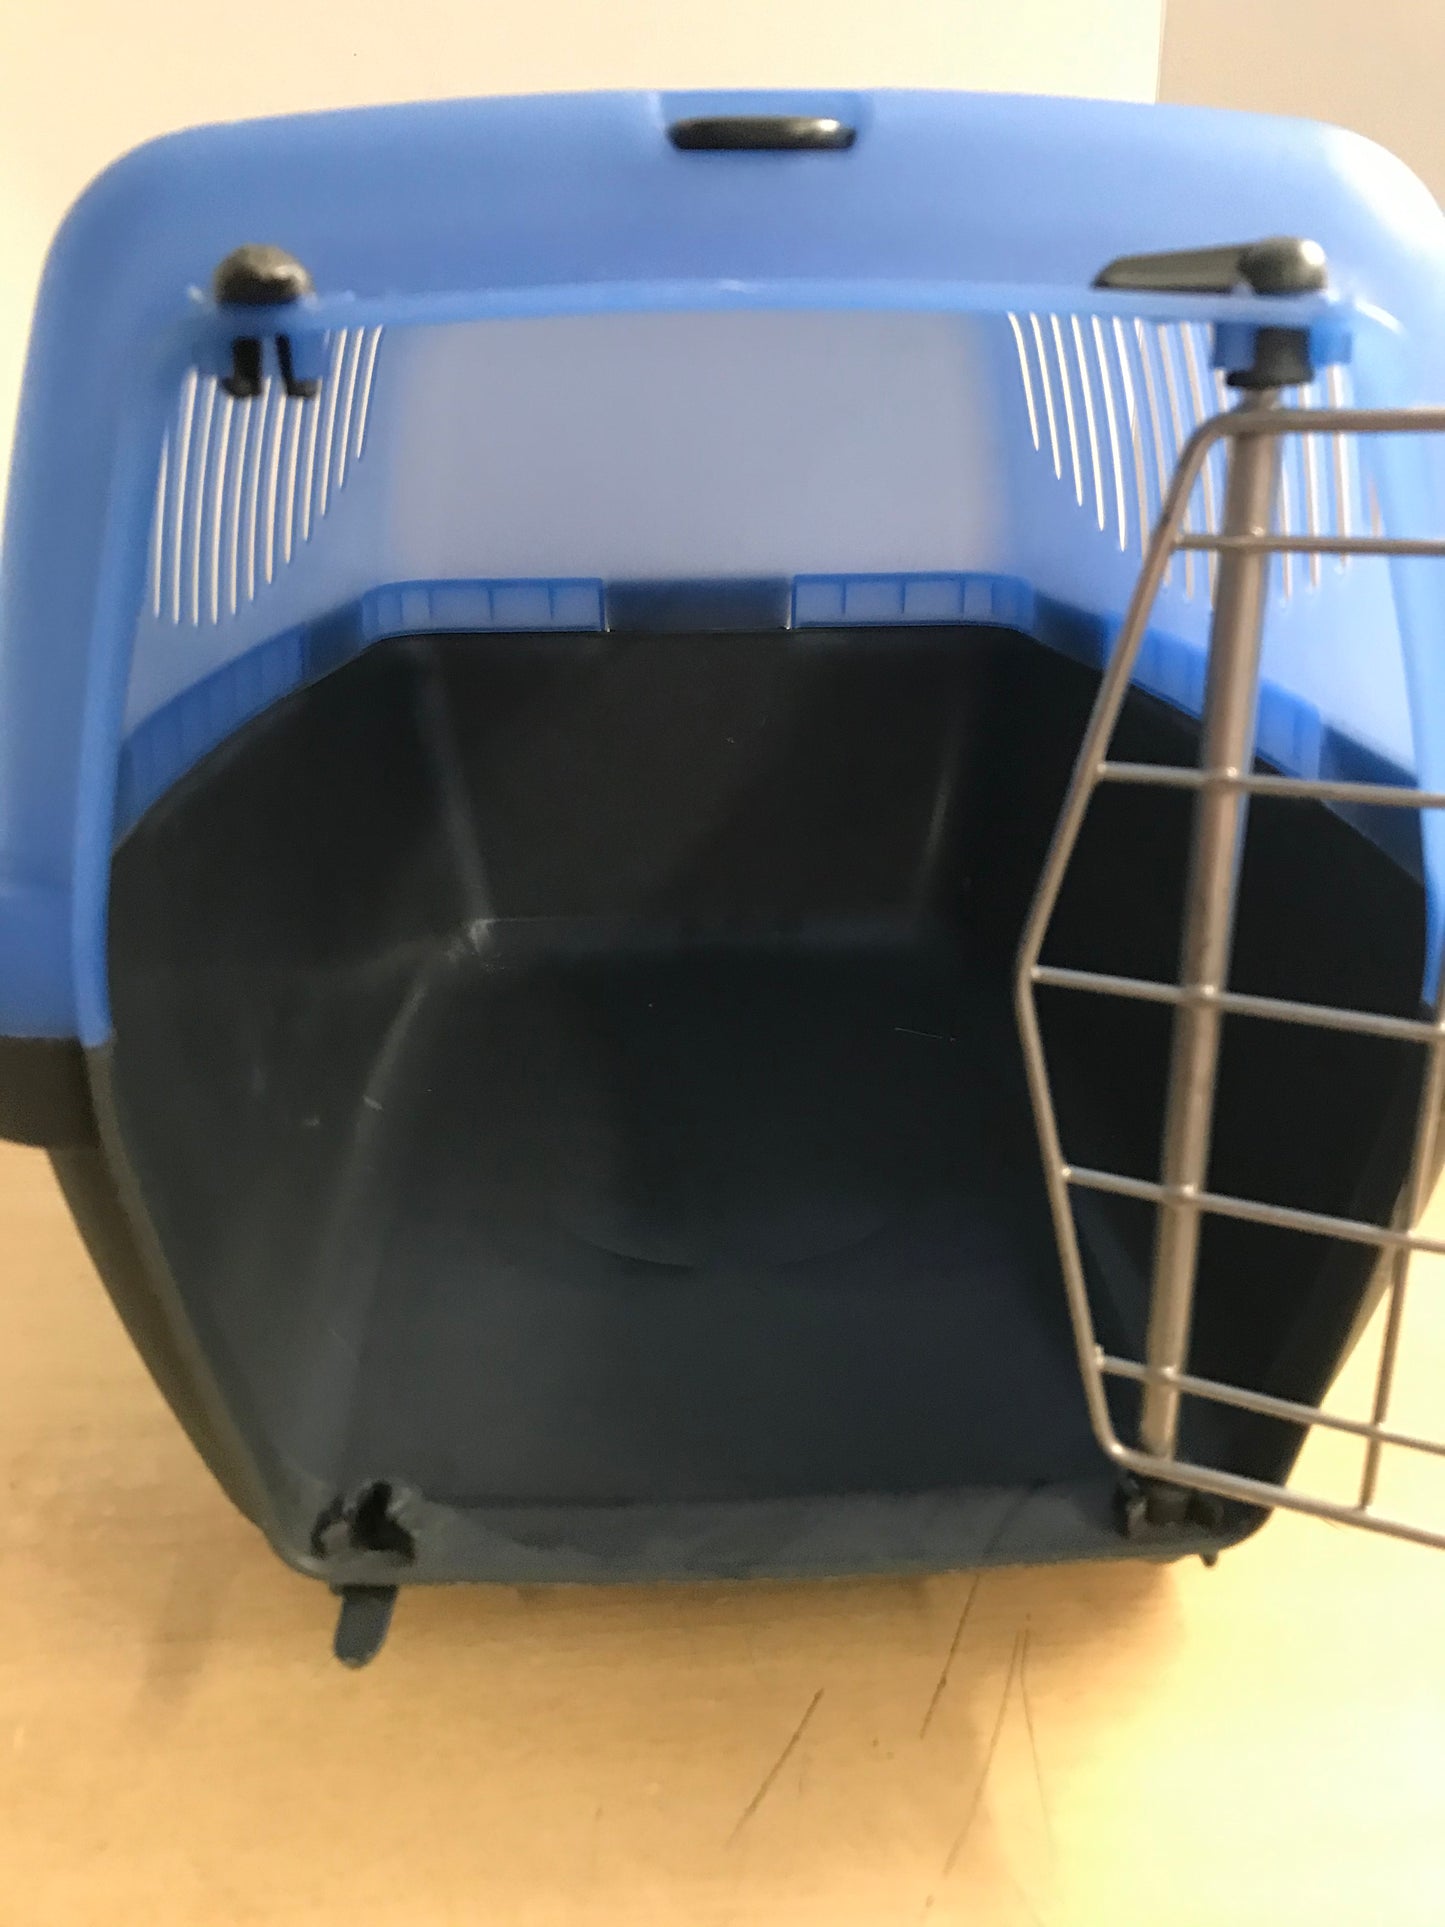 My Little Pet Shop Pet Crate Dog Cat Kennel Small Marine Blue Black Up To 15 Lb 18.9x12.5x12.2 inch